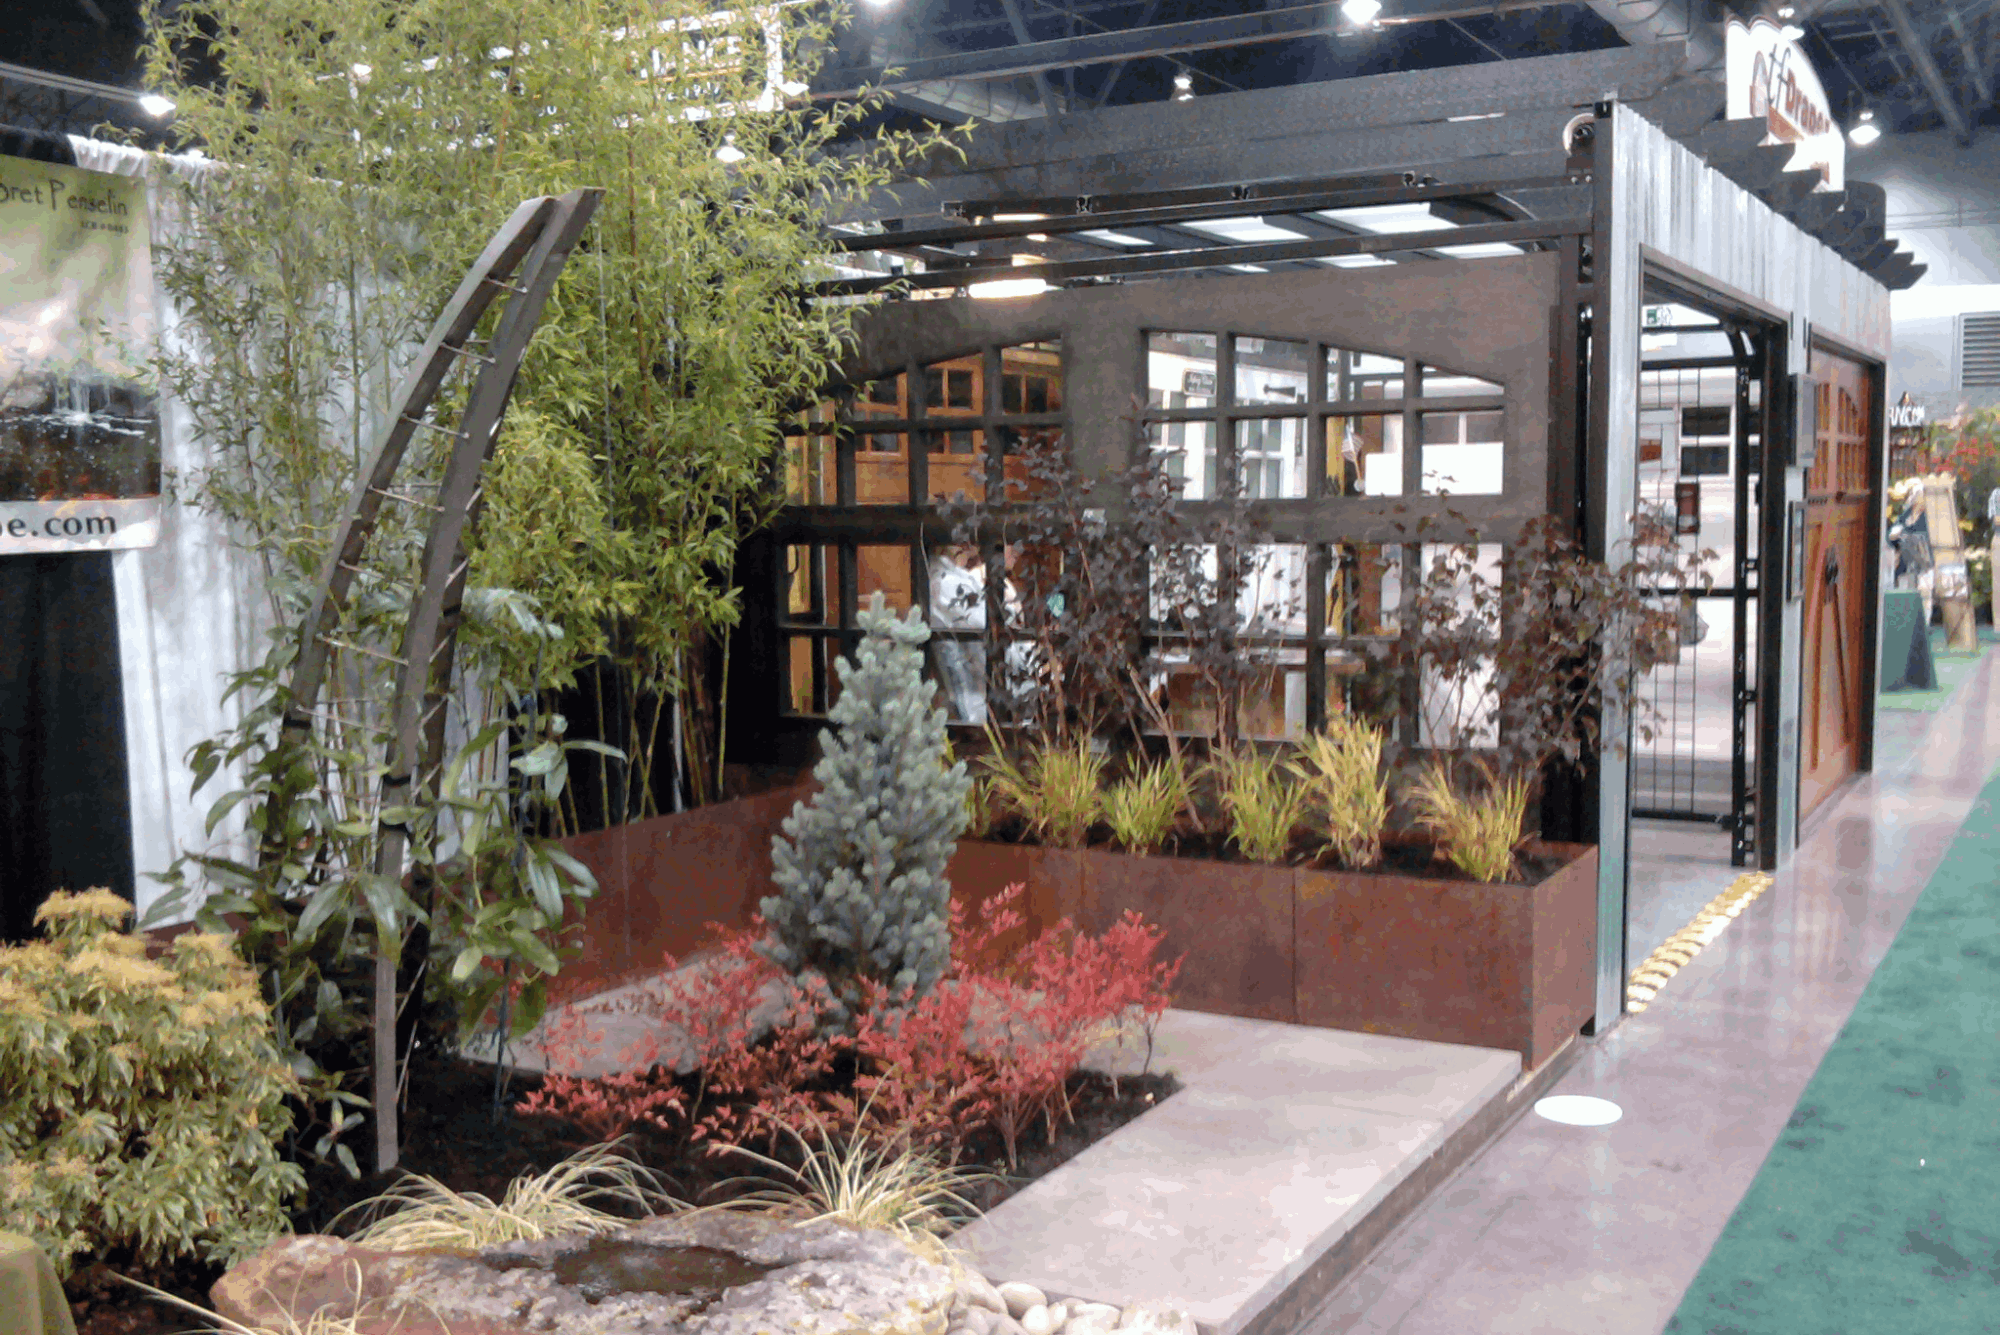 Oregon Outdoor Landscaping showcases the Spring Home and Garden Show